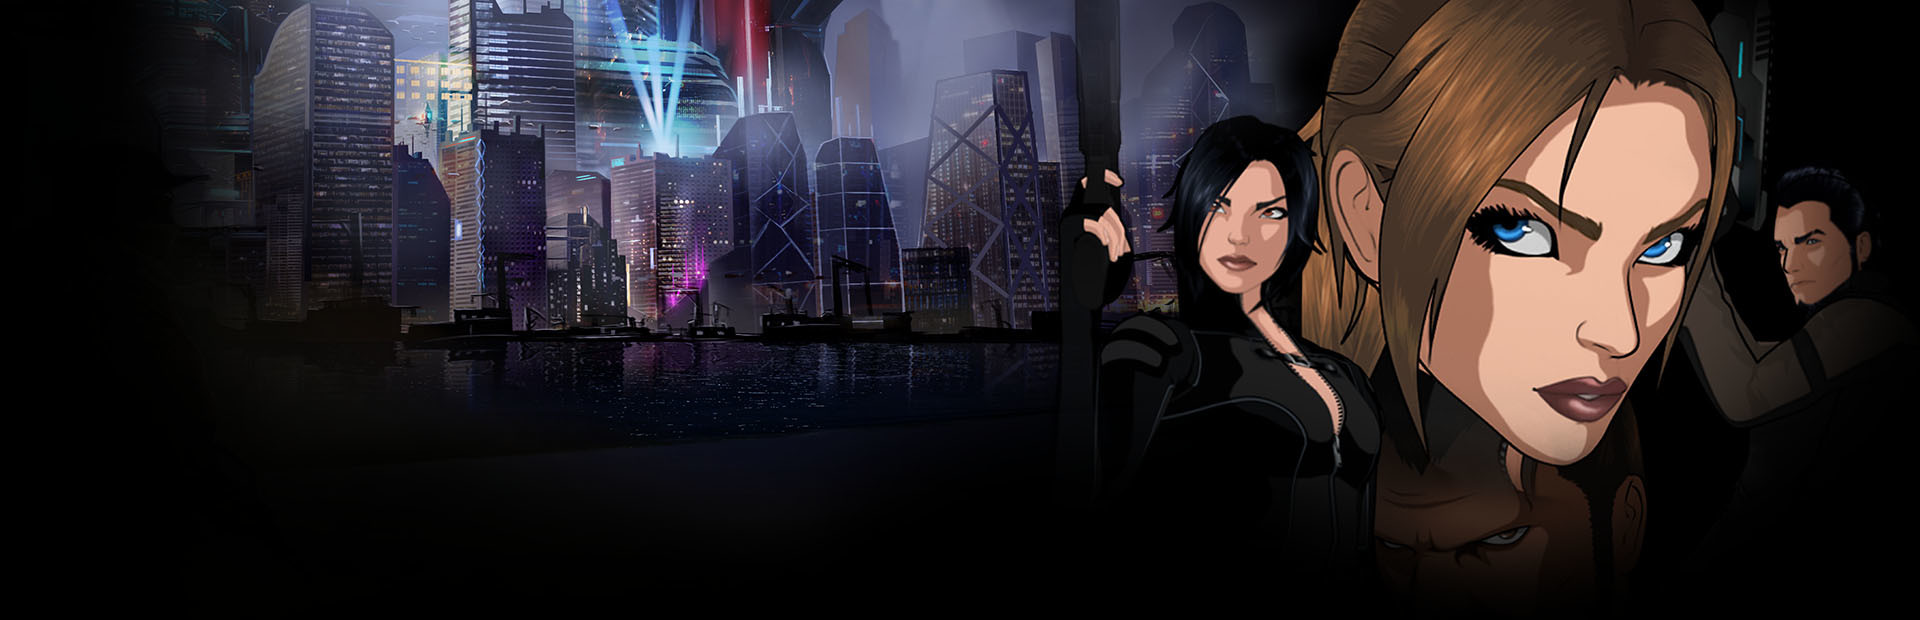 Fear Effect Sedna cover image